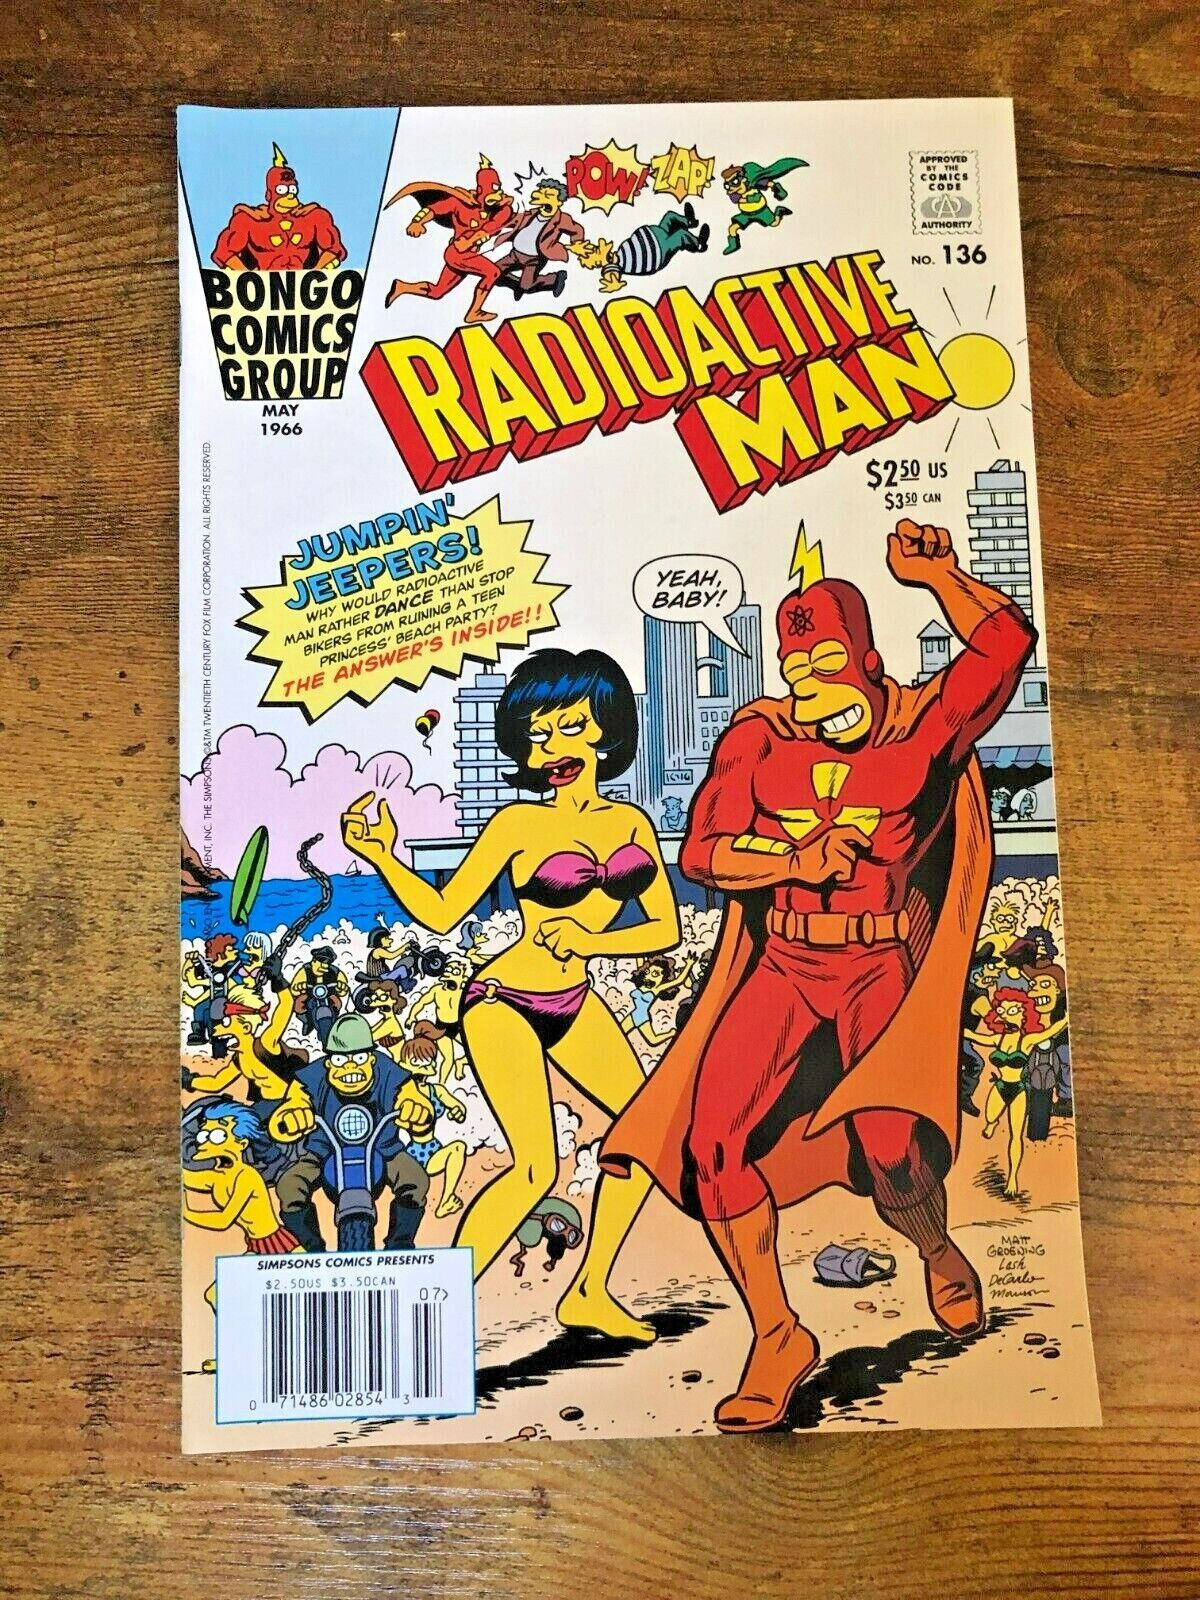 Radioactive Man #136 (Cvr Dated 1966) (Vol 2 #3 2001) Campy 60s Issue - VF/NM